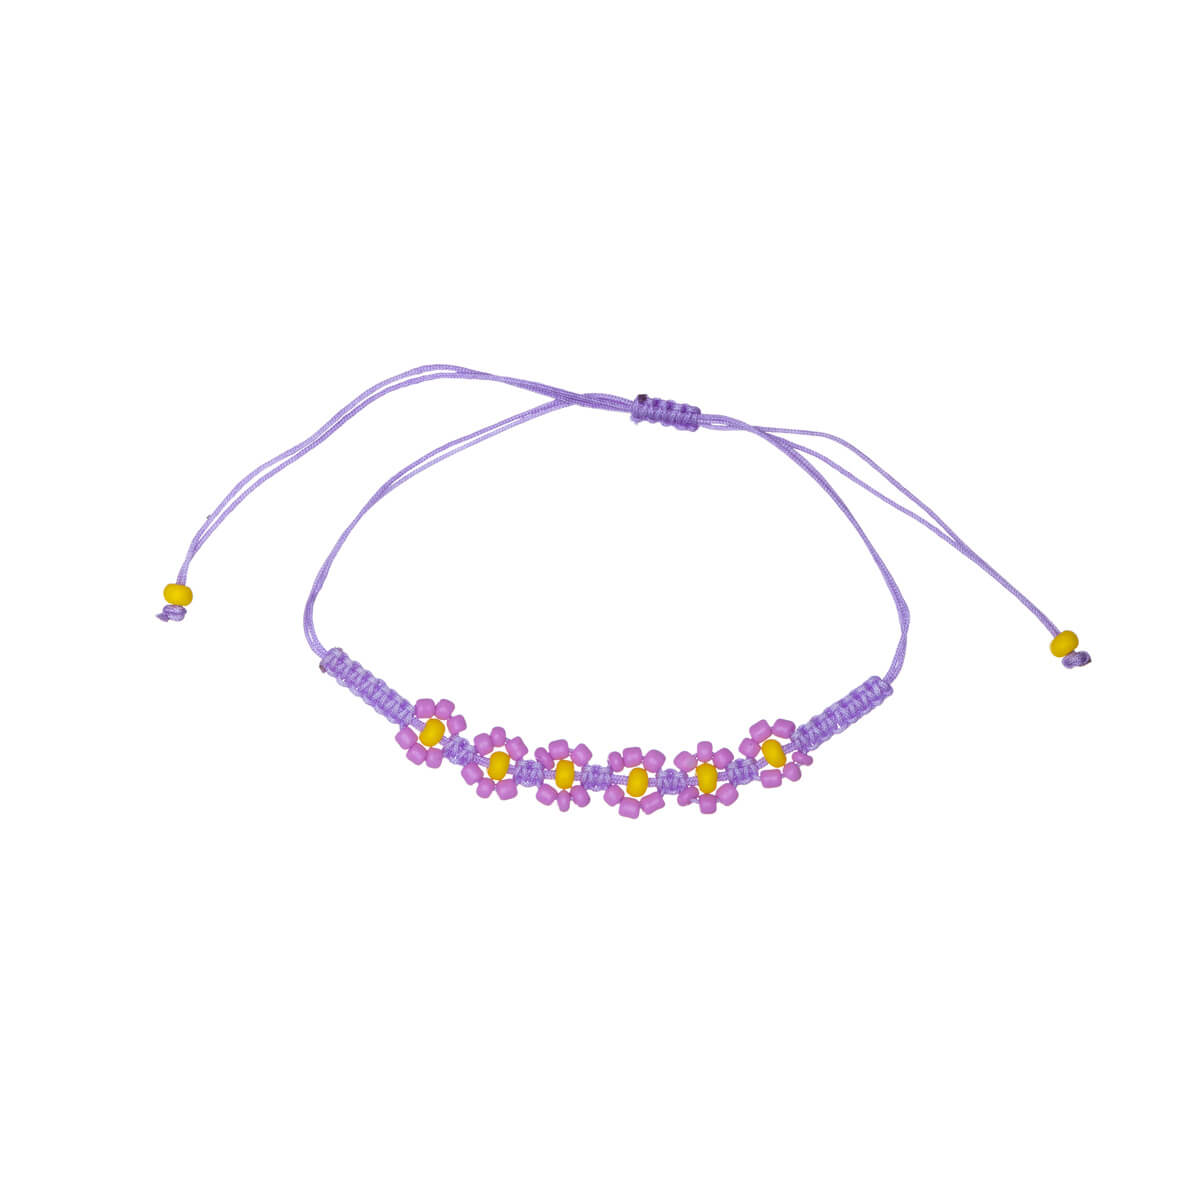 Colourful flower bracelet with beads